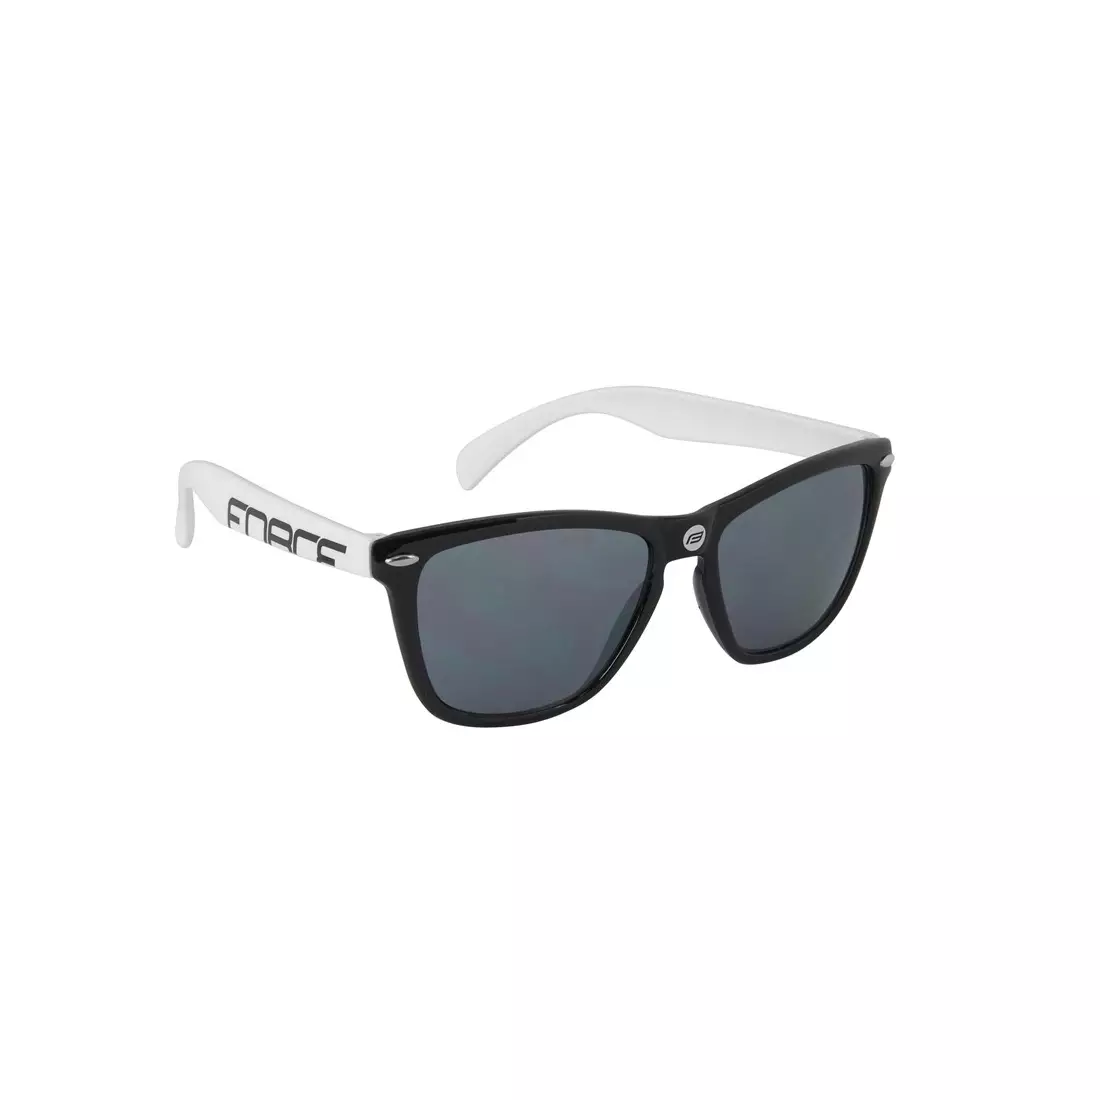 FORCE free sports glasses black and white 91030